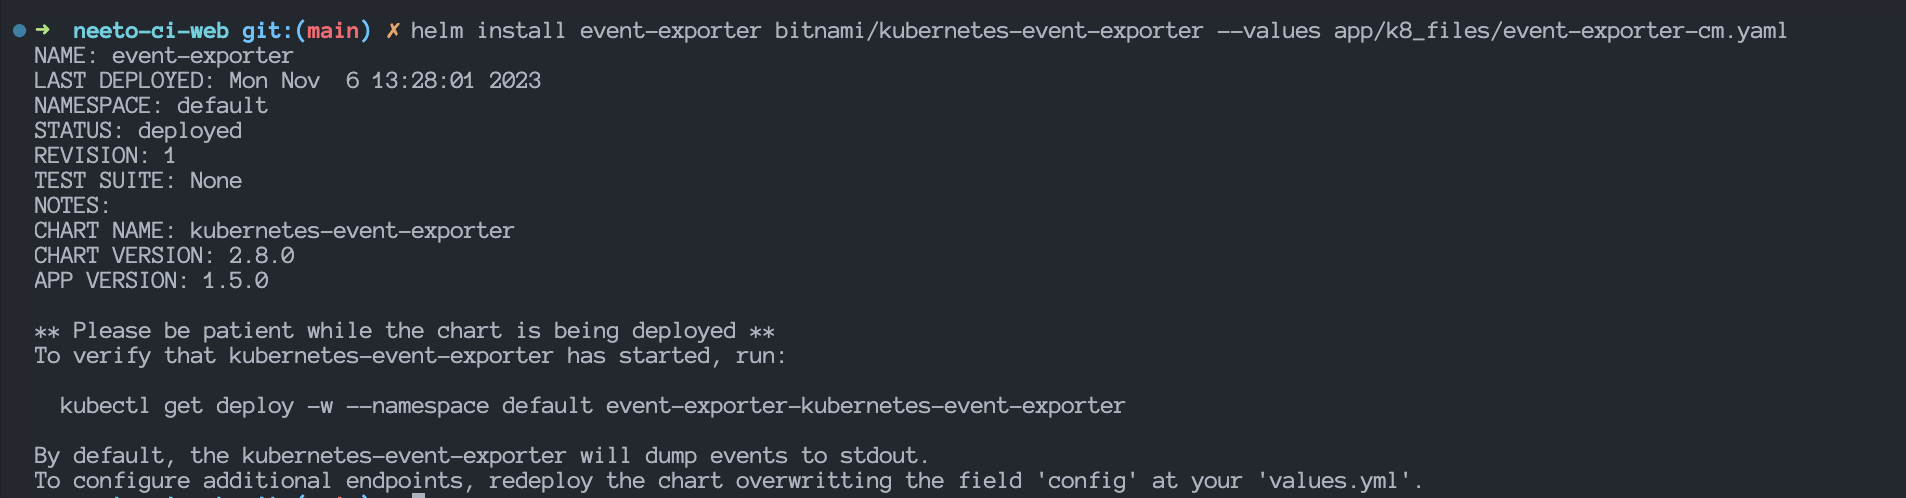 event-exporter-installation-output.png